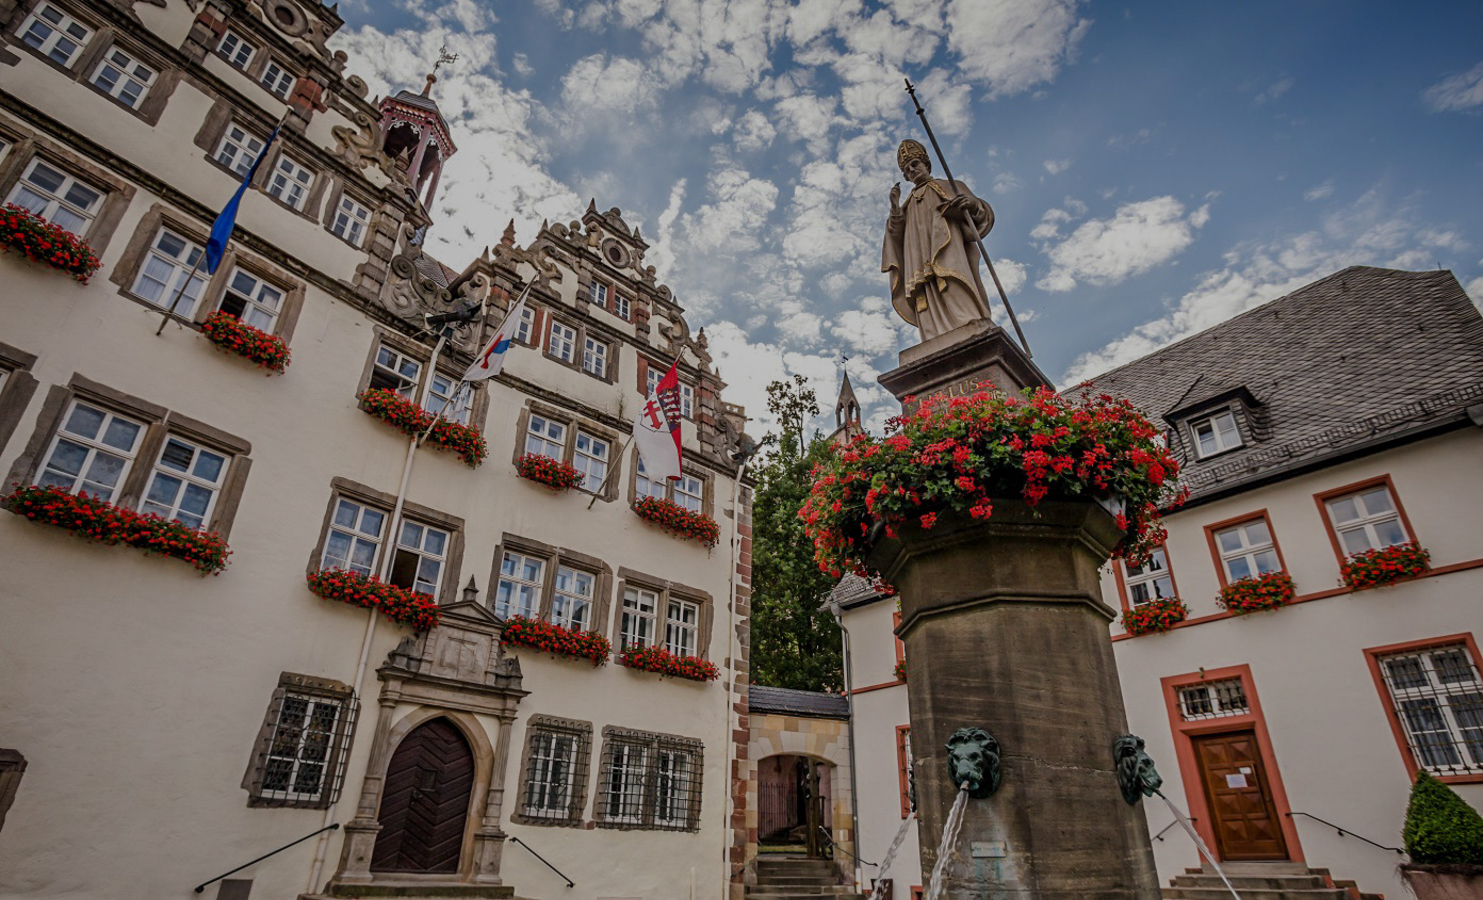 The Bad Hersfeld location has a historic old town with half-timbered houses and a town wall.